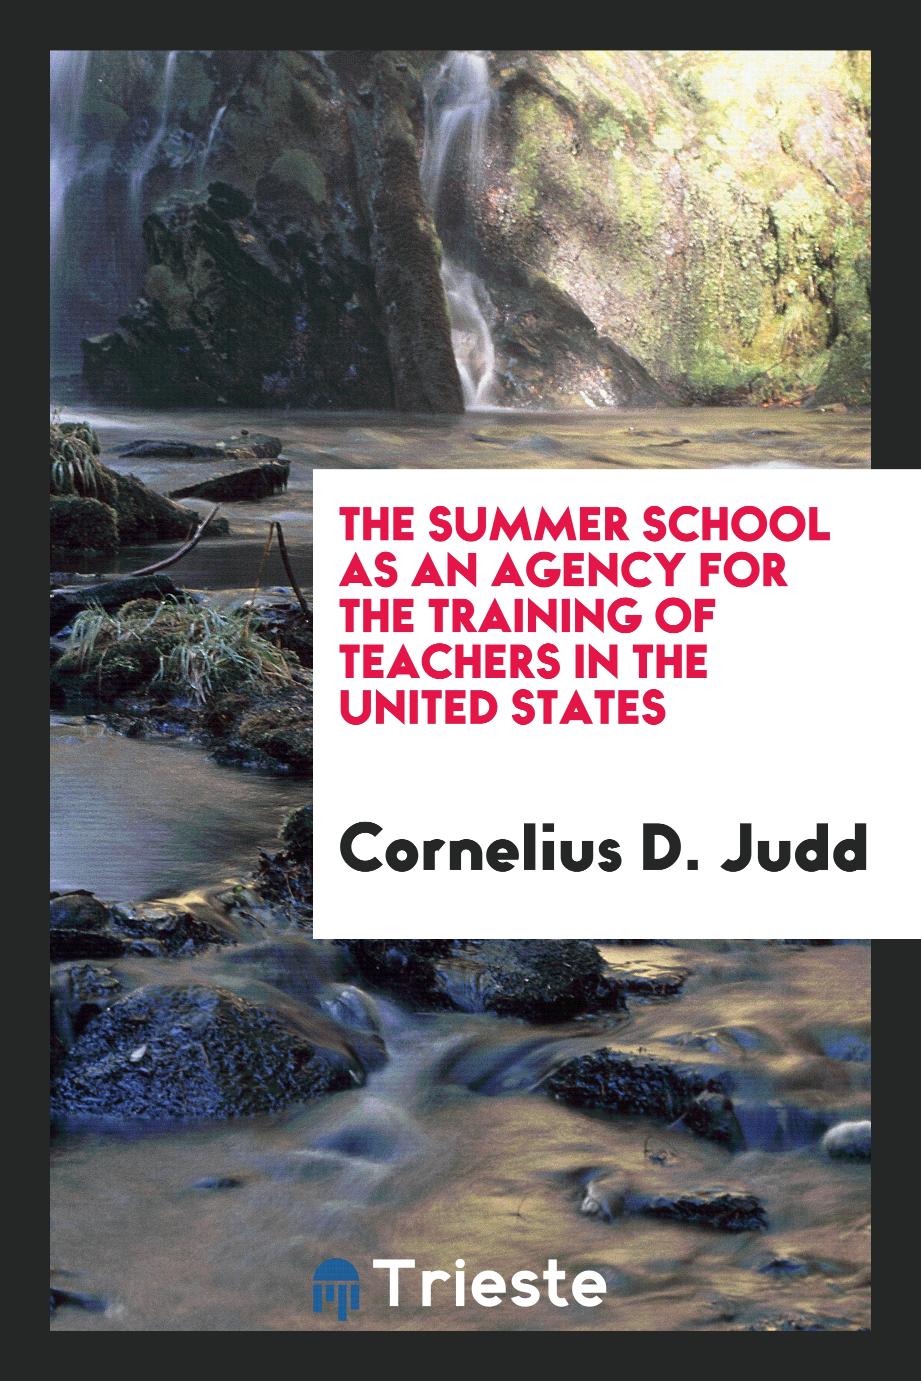 The summer school as an Agency for the training of teachers in the United States